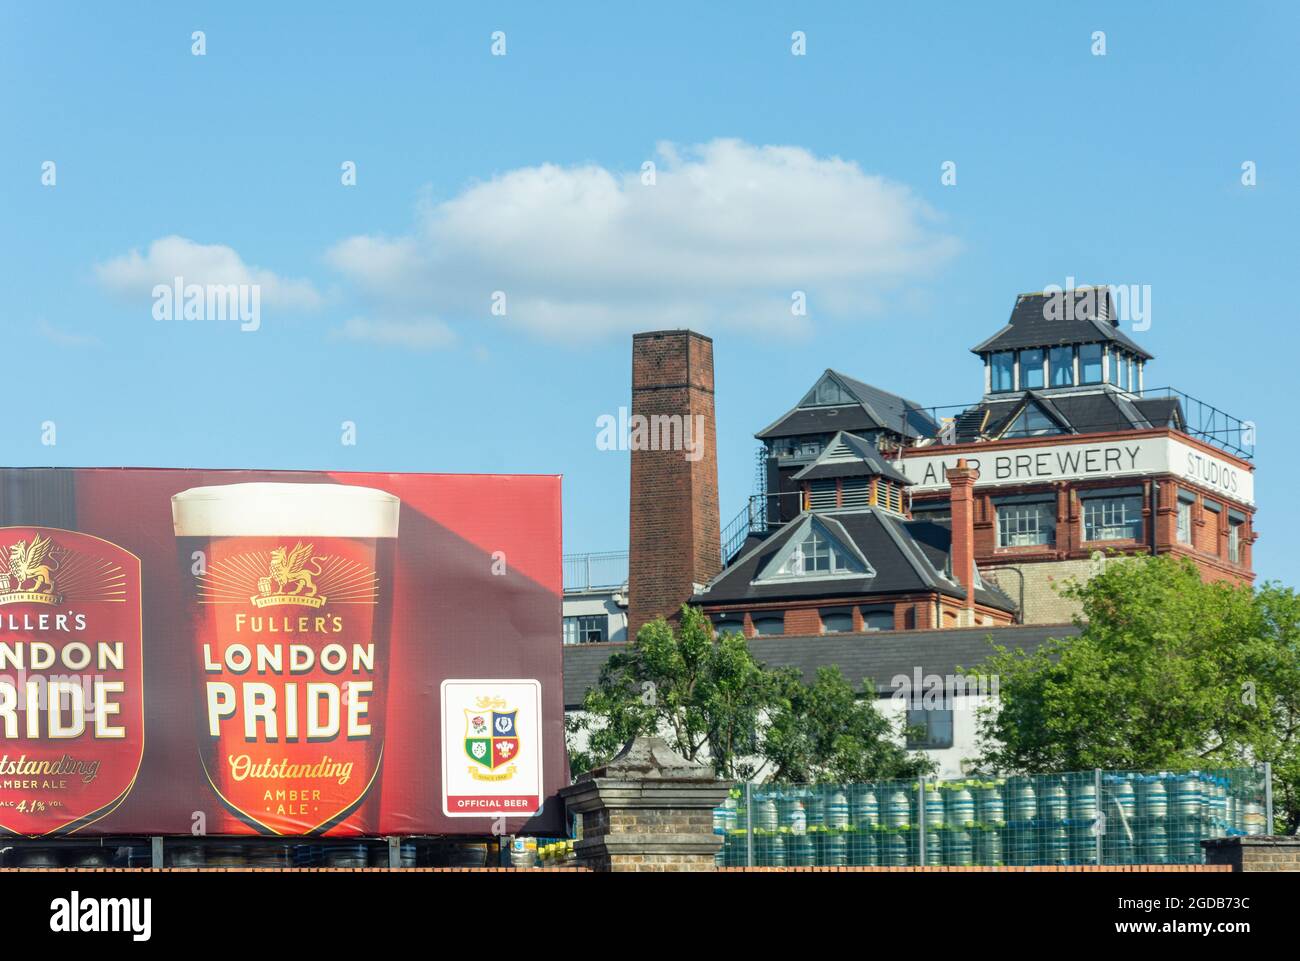 Former Lamb Brewery and Fuller's Griffin Brewery, Cheswick Lane, Chiswick, London Borough of Hounslow, Greater London, England, United Kingdom Stock Photo